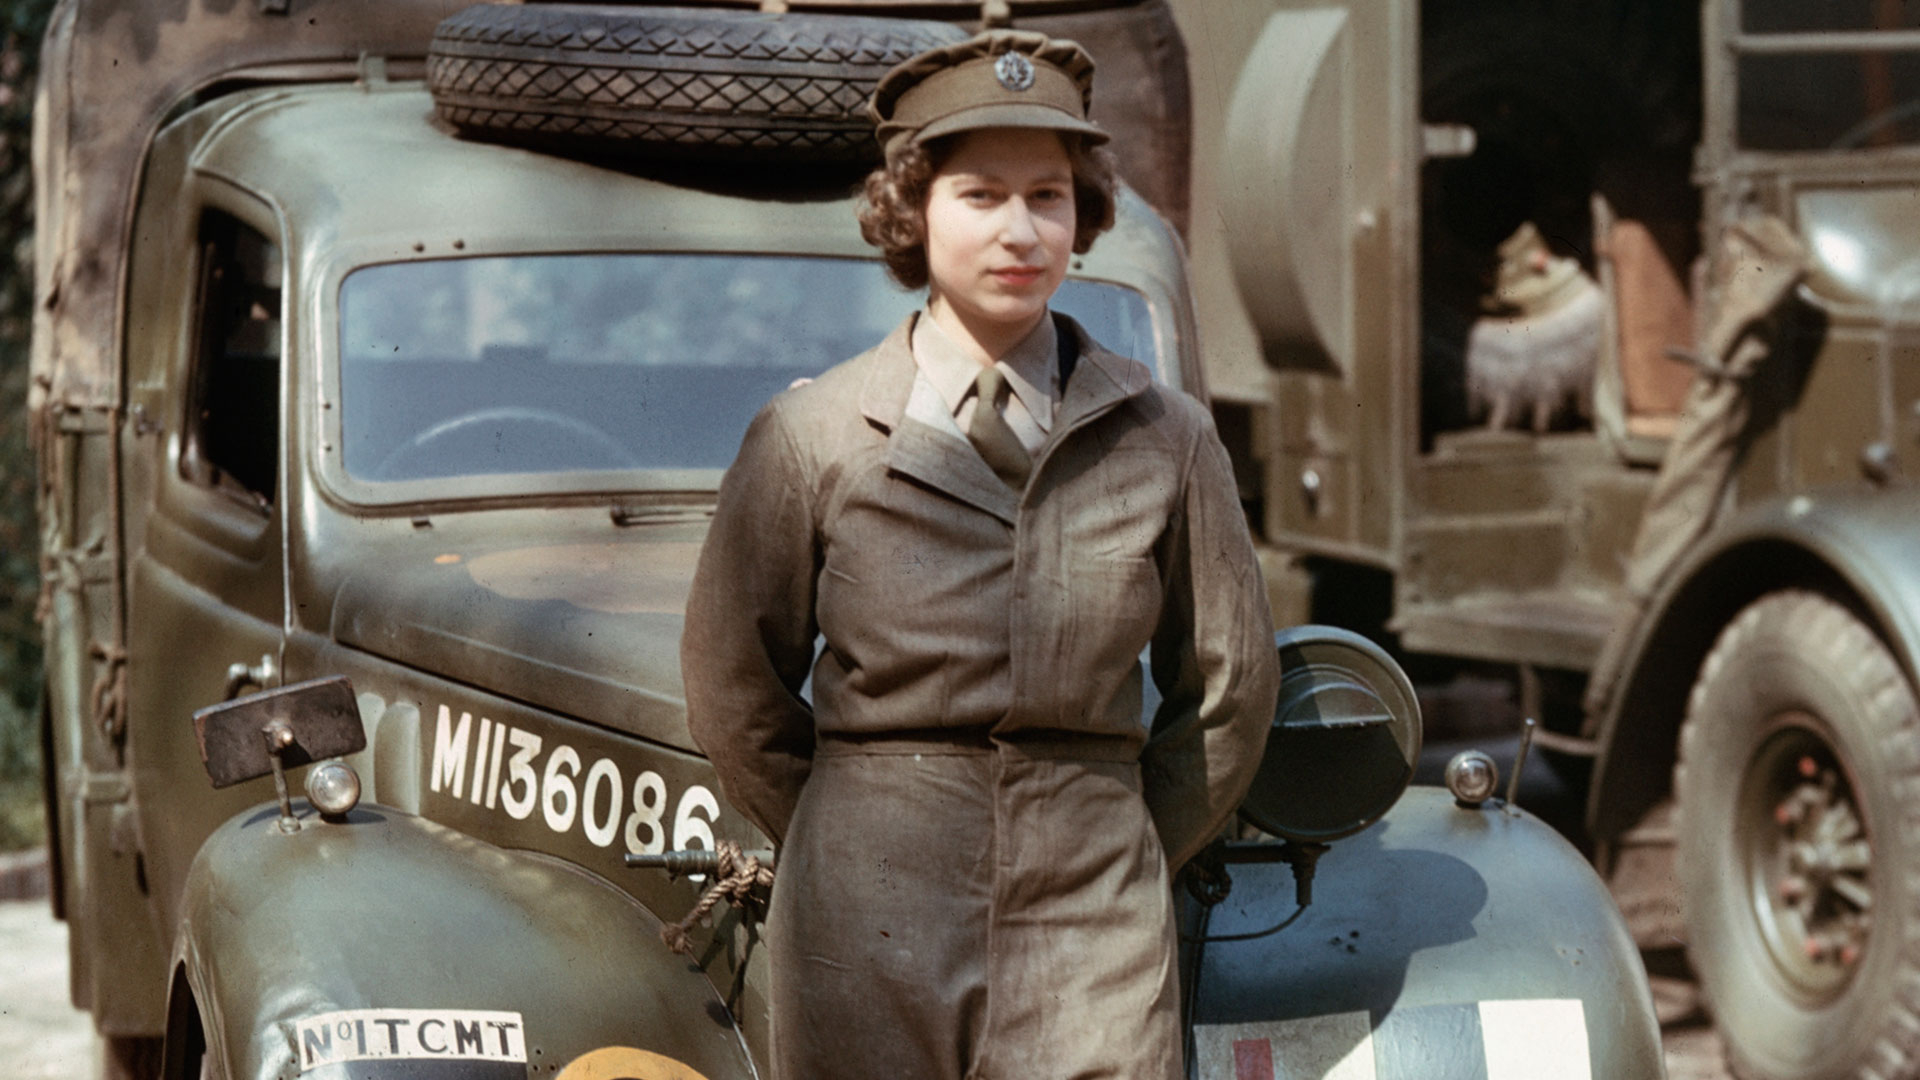 Queen Elizabeth II as a young woman during WWII